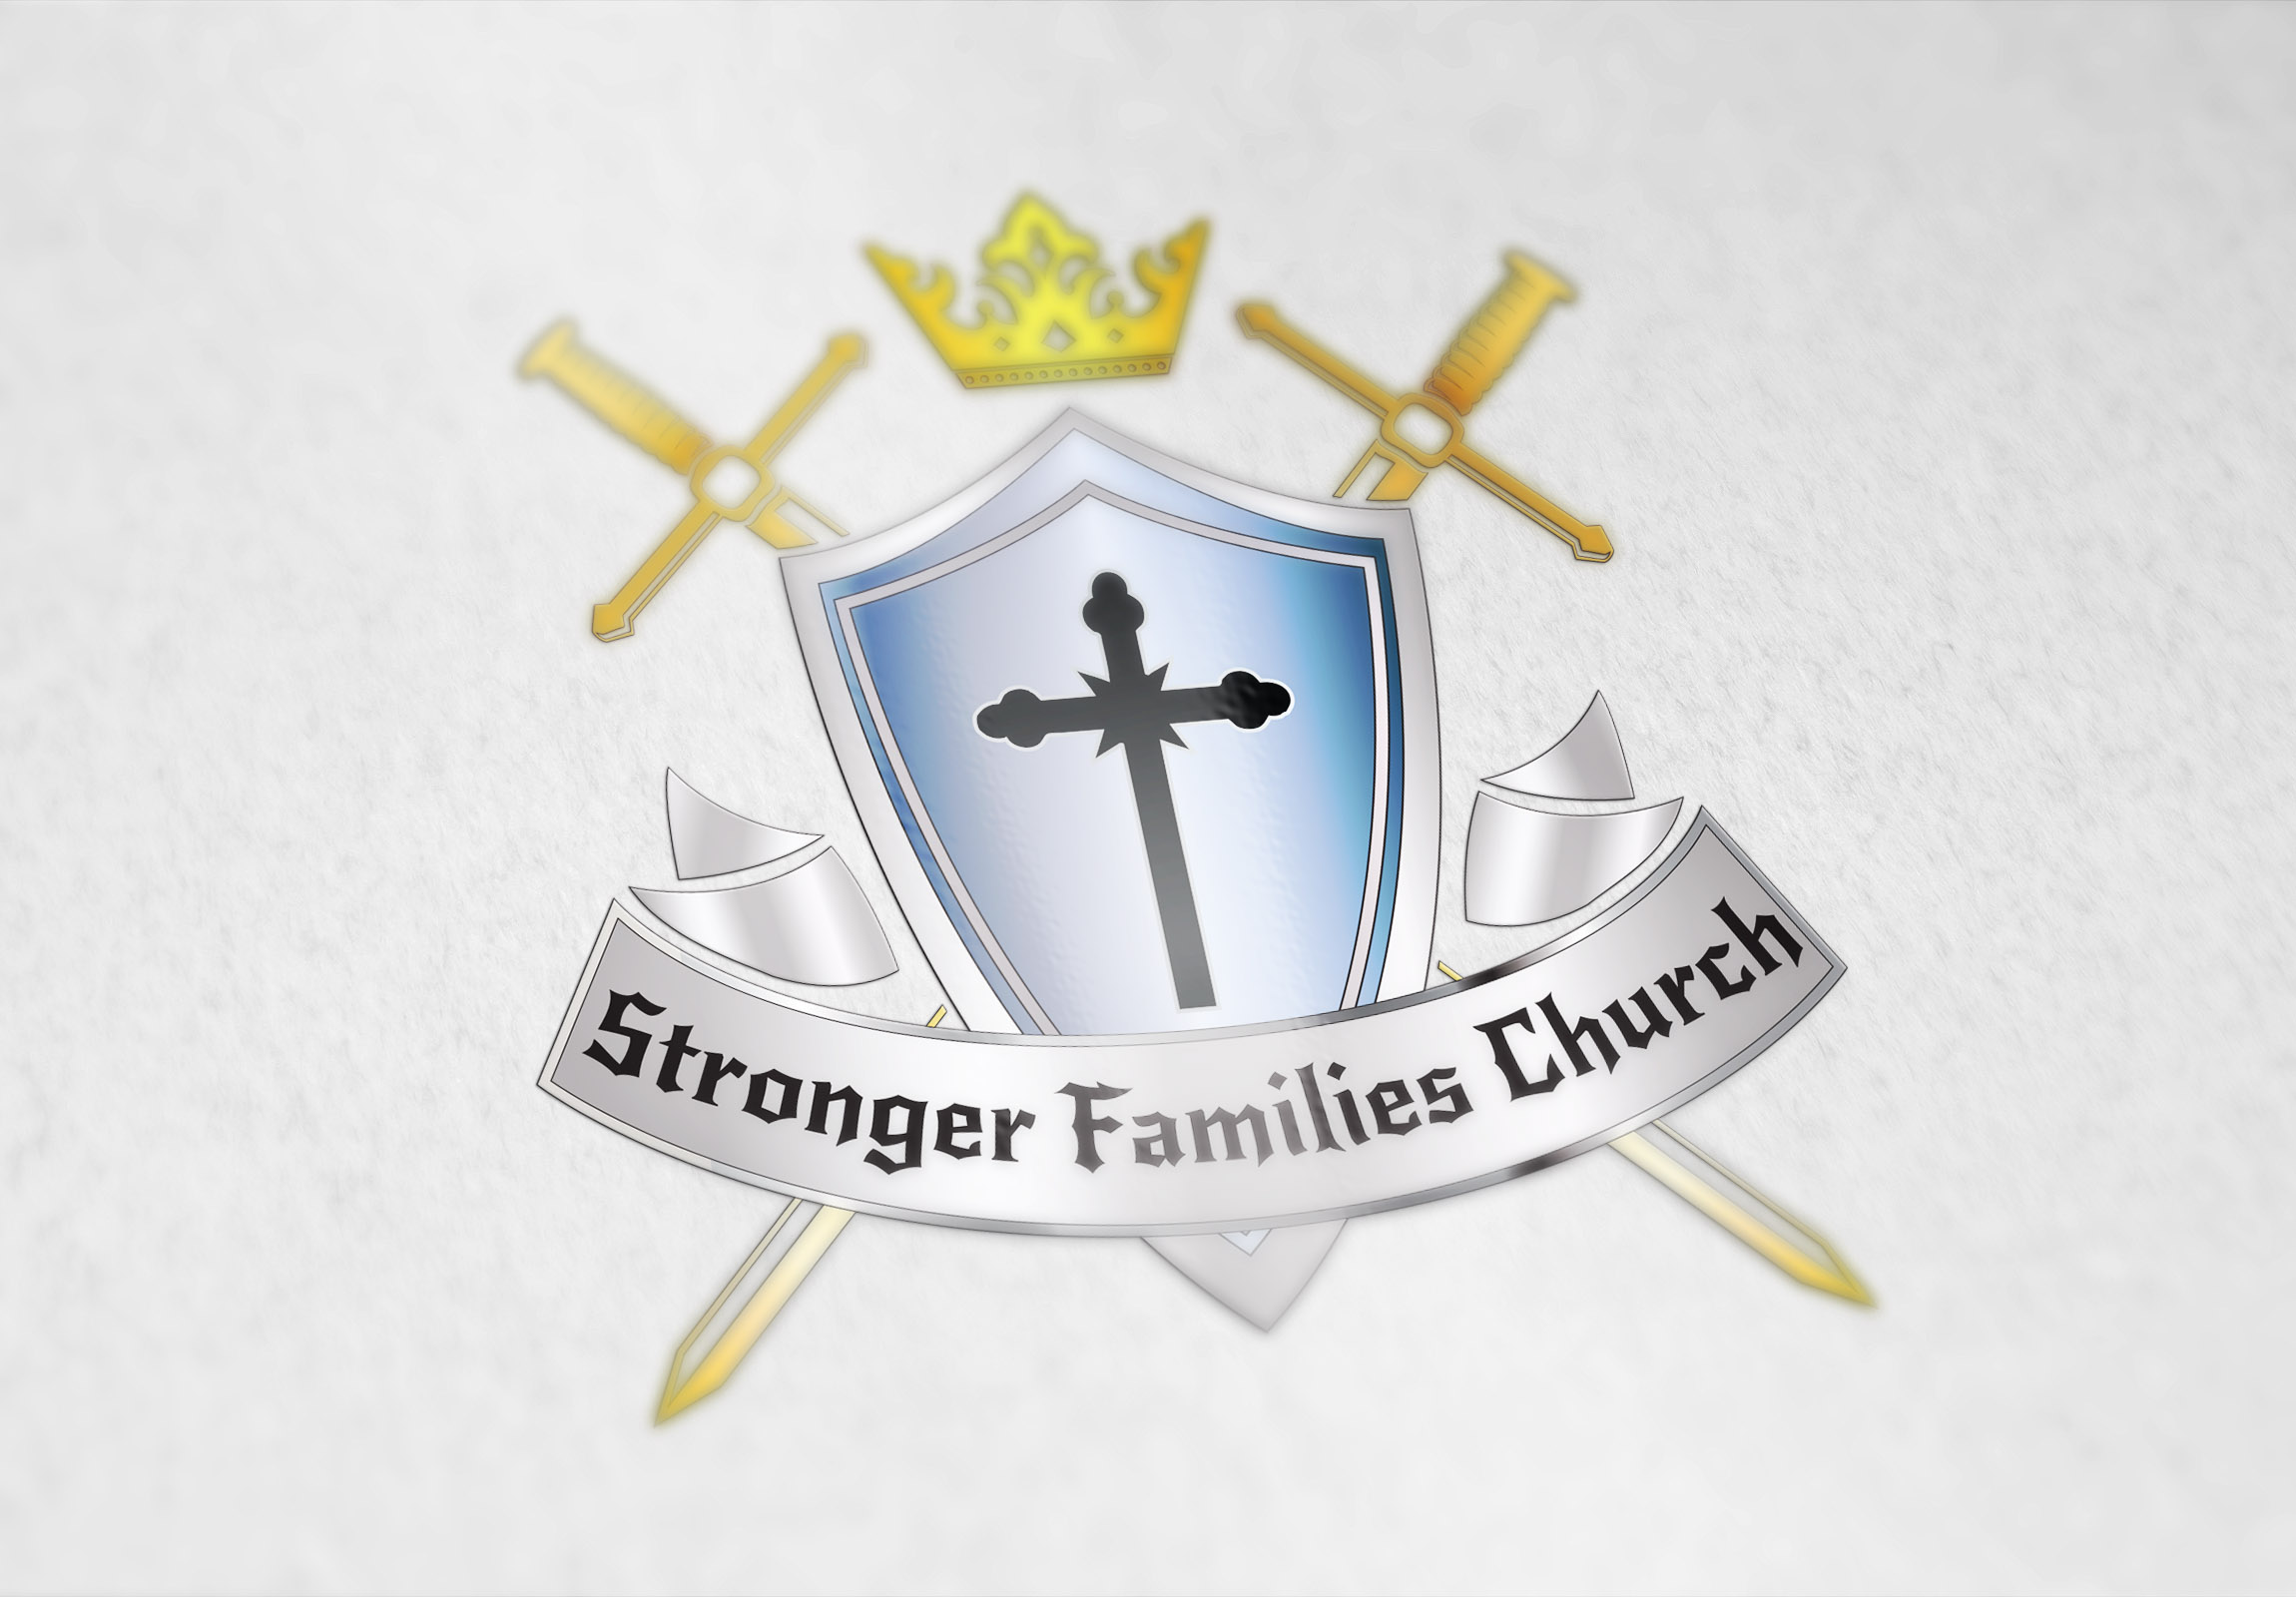 Coat of arms designed for the Stronger Families Church in the USA